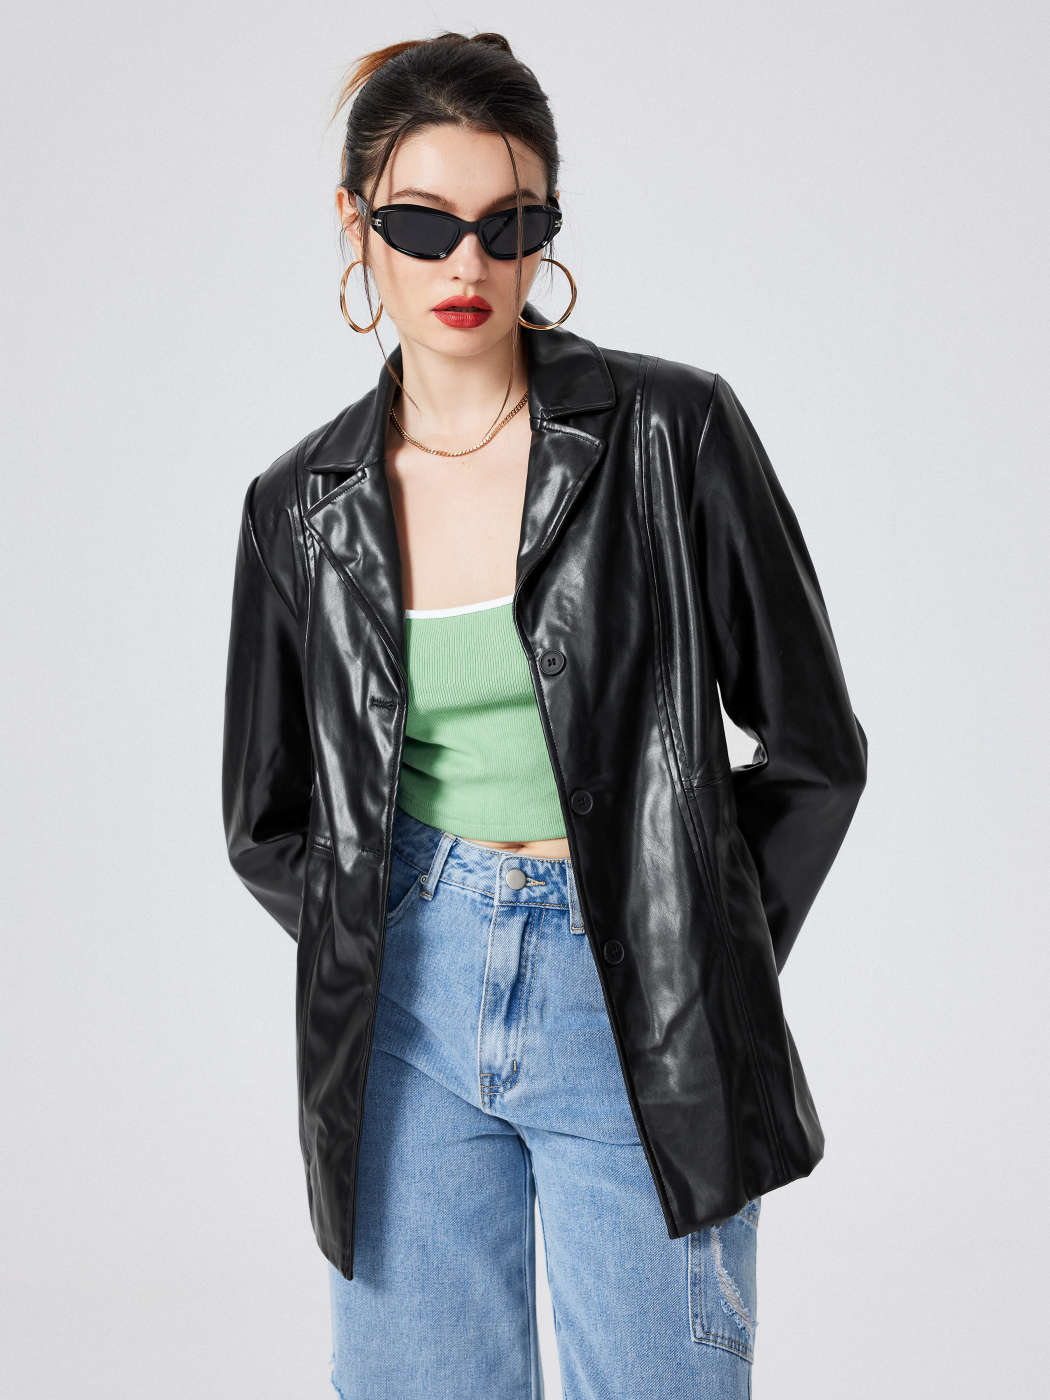 Over-sized Blazer And Jeans  The Coolest Faux Leather Blazer